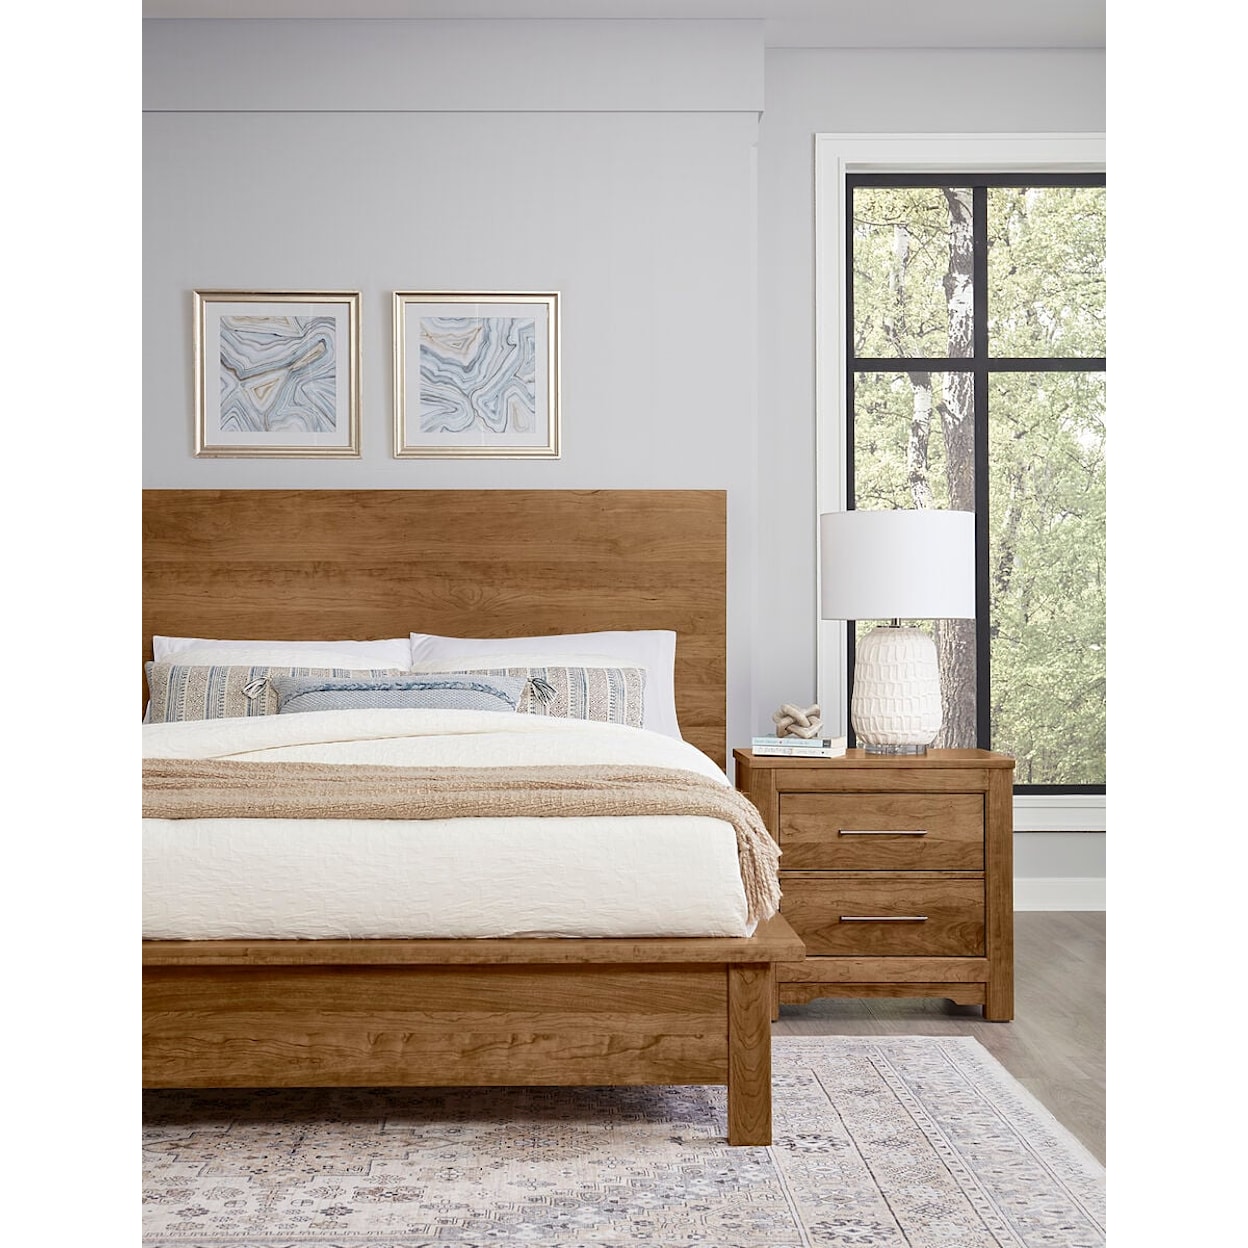 Virginia House Crafted Cherry - Medium Queen Terrace Bed